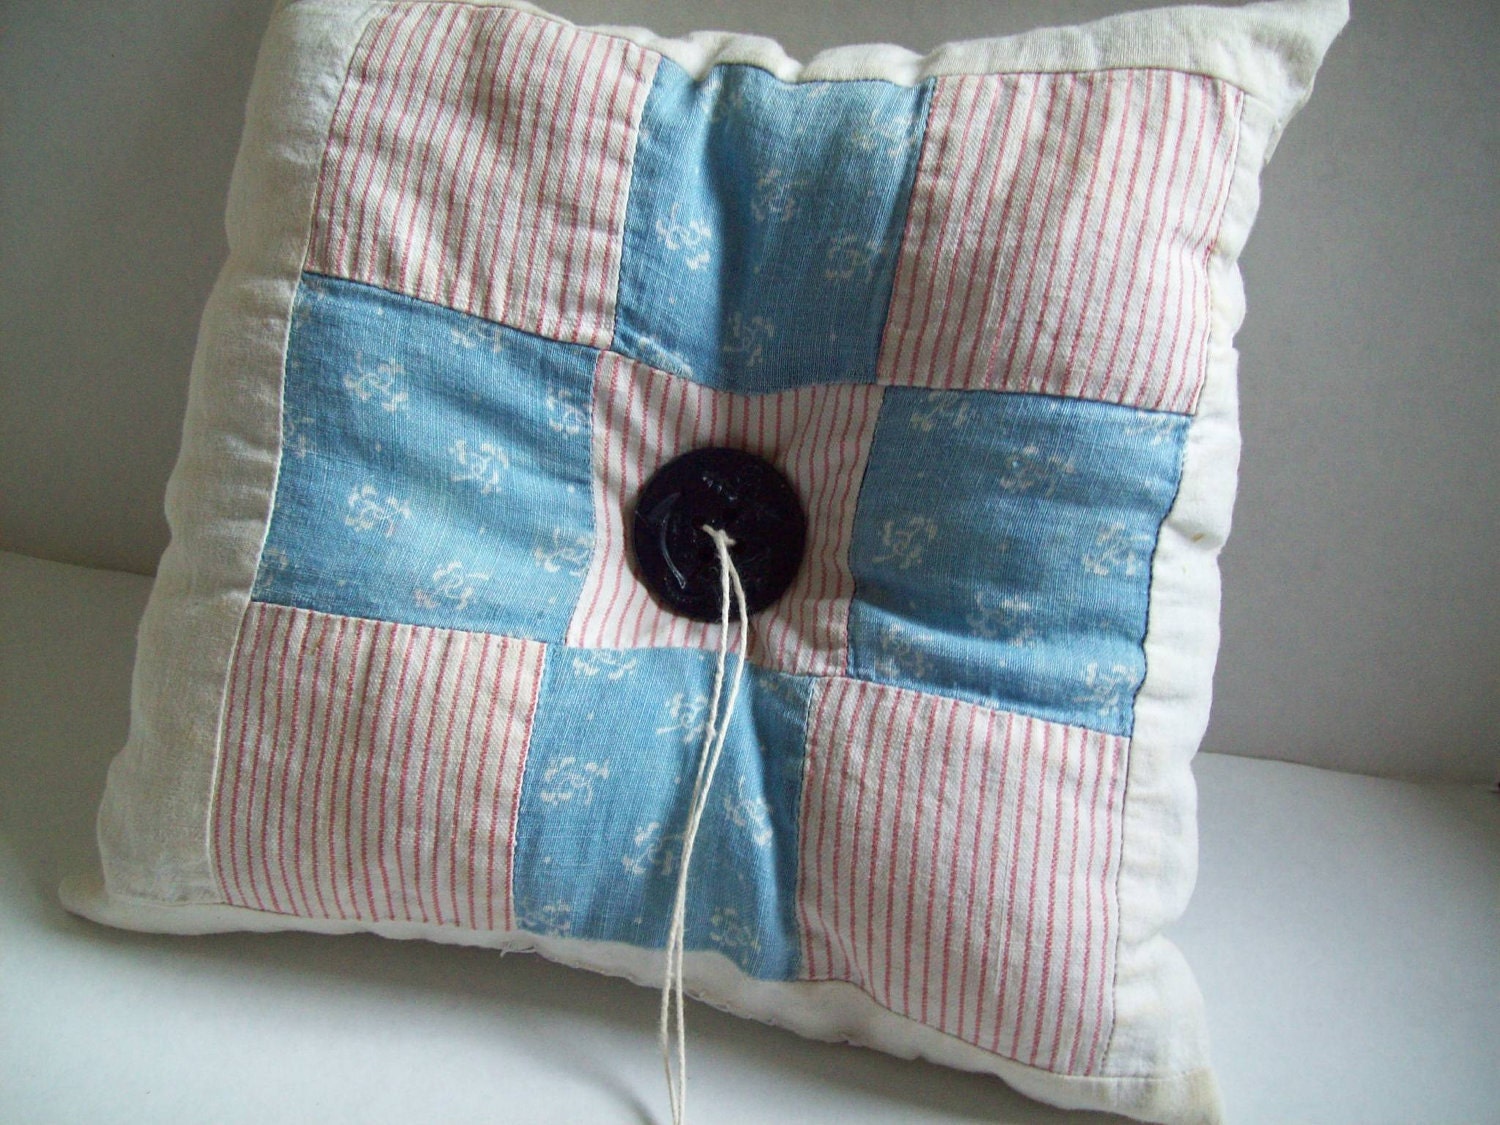 Quilted 009 ... vintage wedding ring pillow